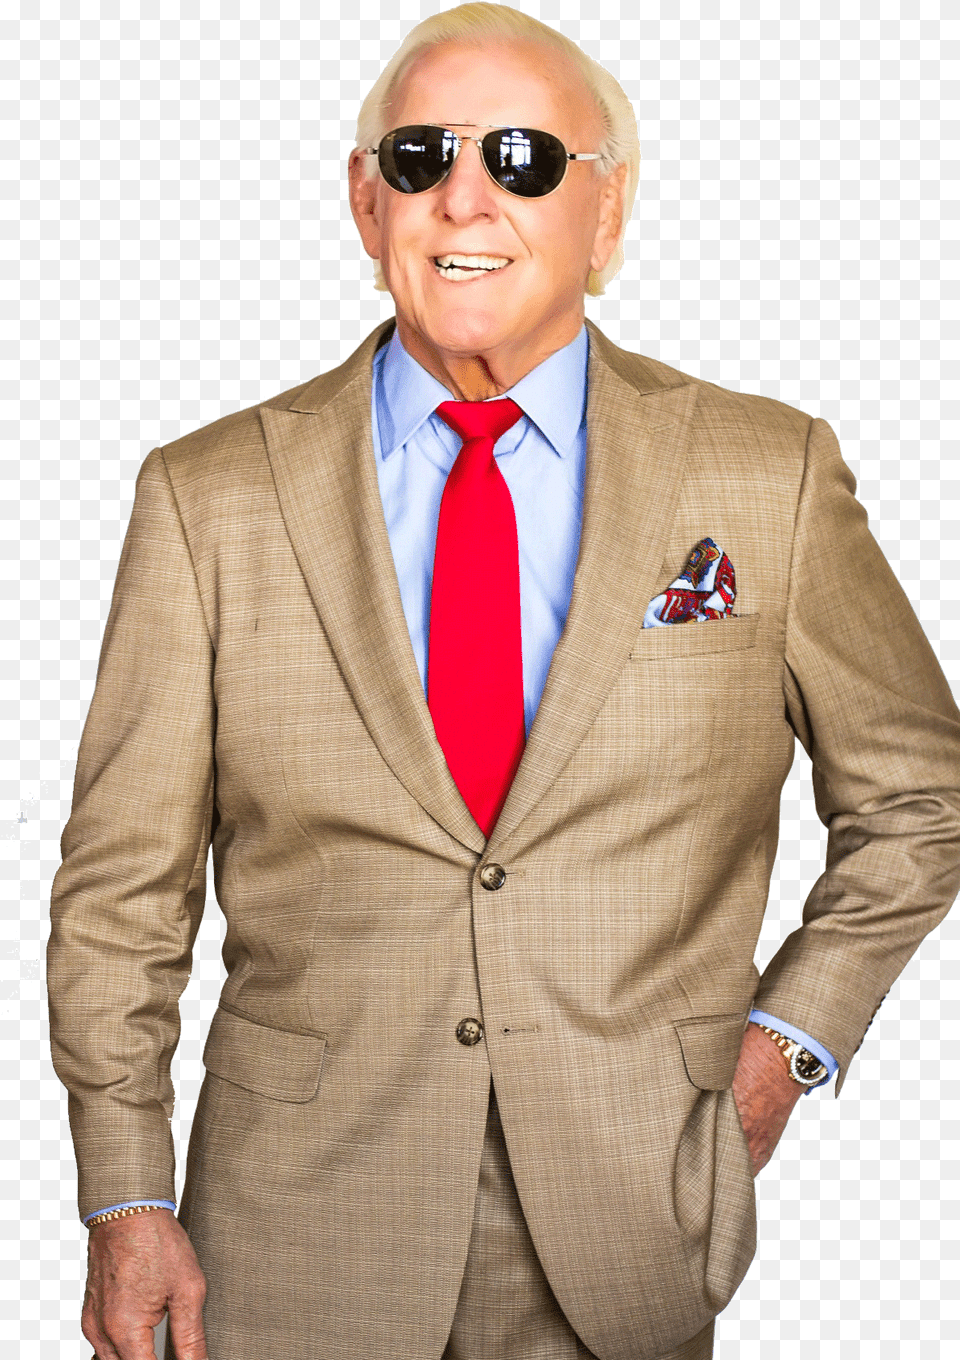 Championship Gold Custom Suit Ric Flair Collection Ric Flair In A Suit, Accessories, Sunglasses, Jacket, Formal Wear Png